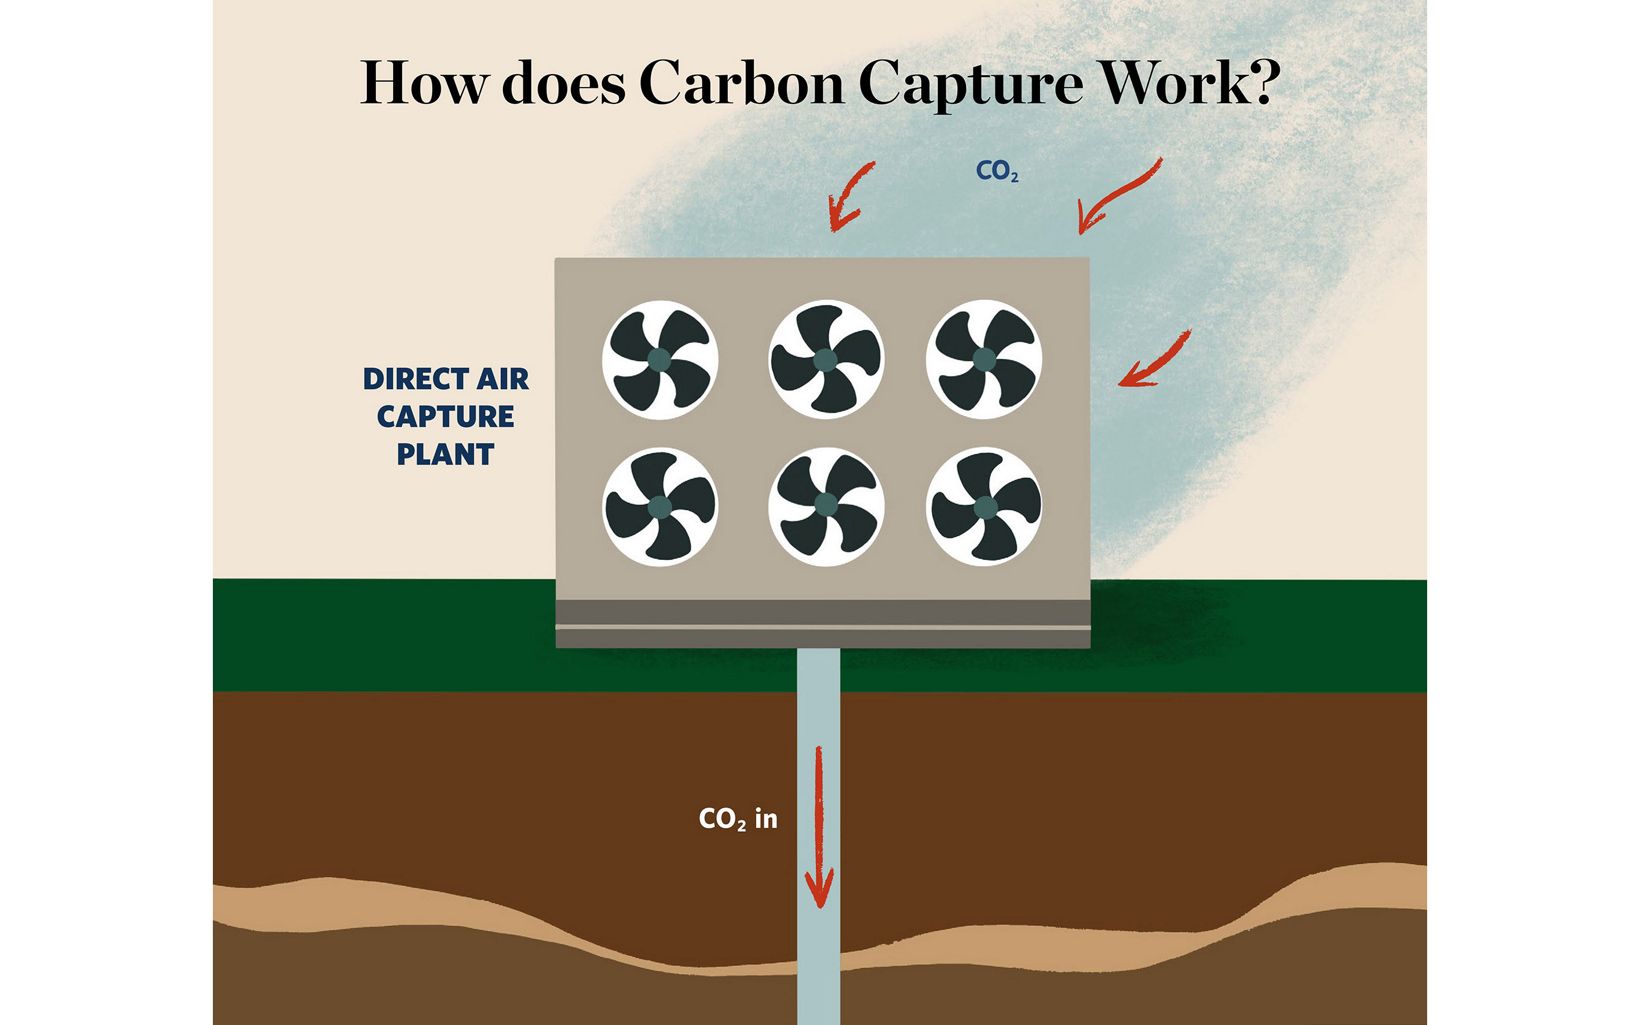 Illustration of six-fan device pulling CO2 out of air and pumping liquified CO2 into ground.